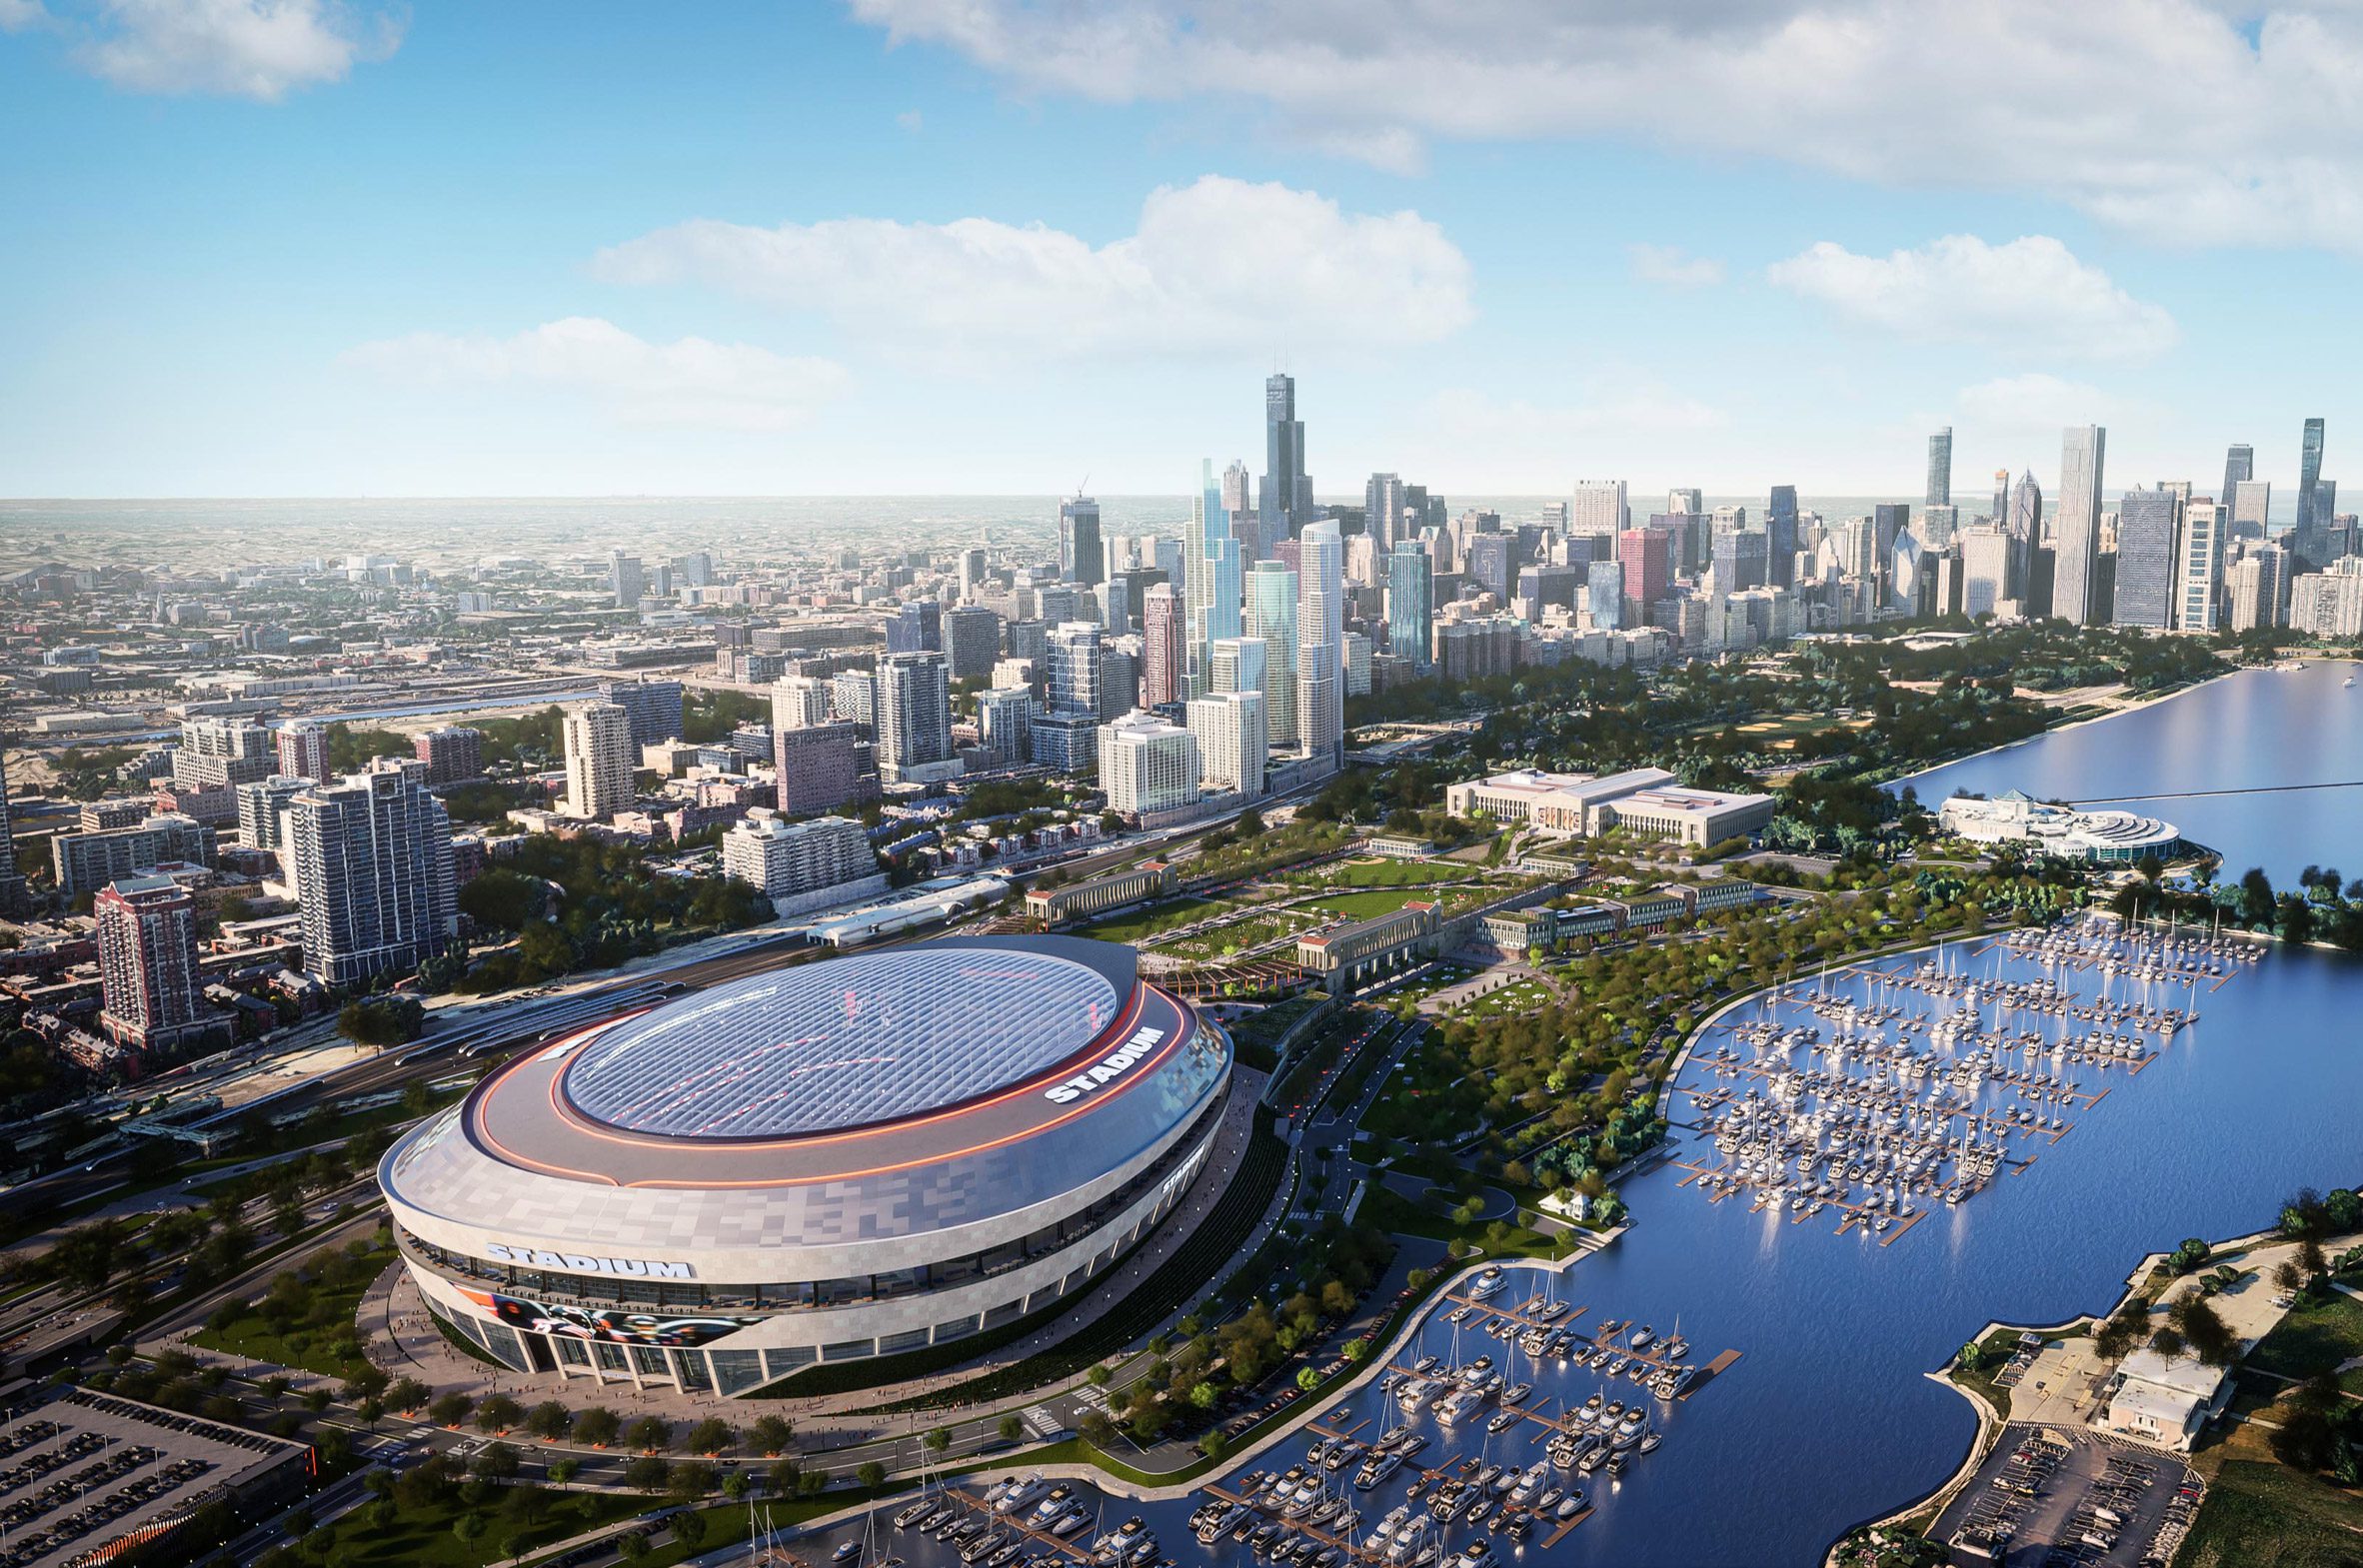 New Bears stadium with Chicago in the background